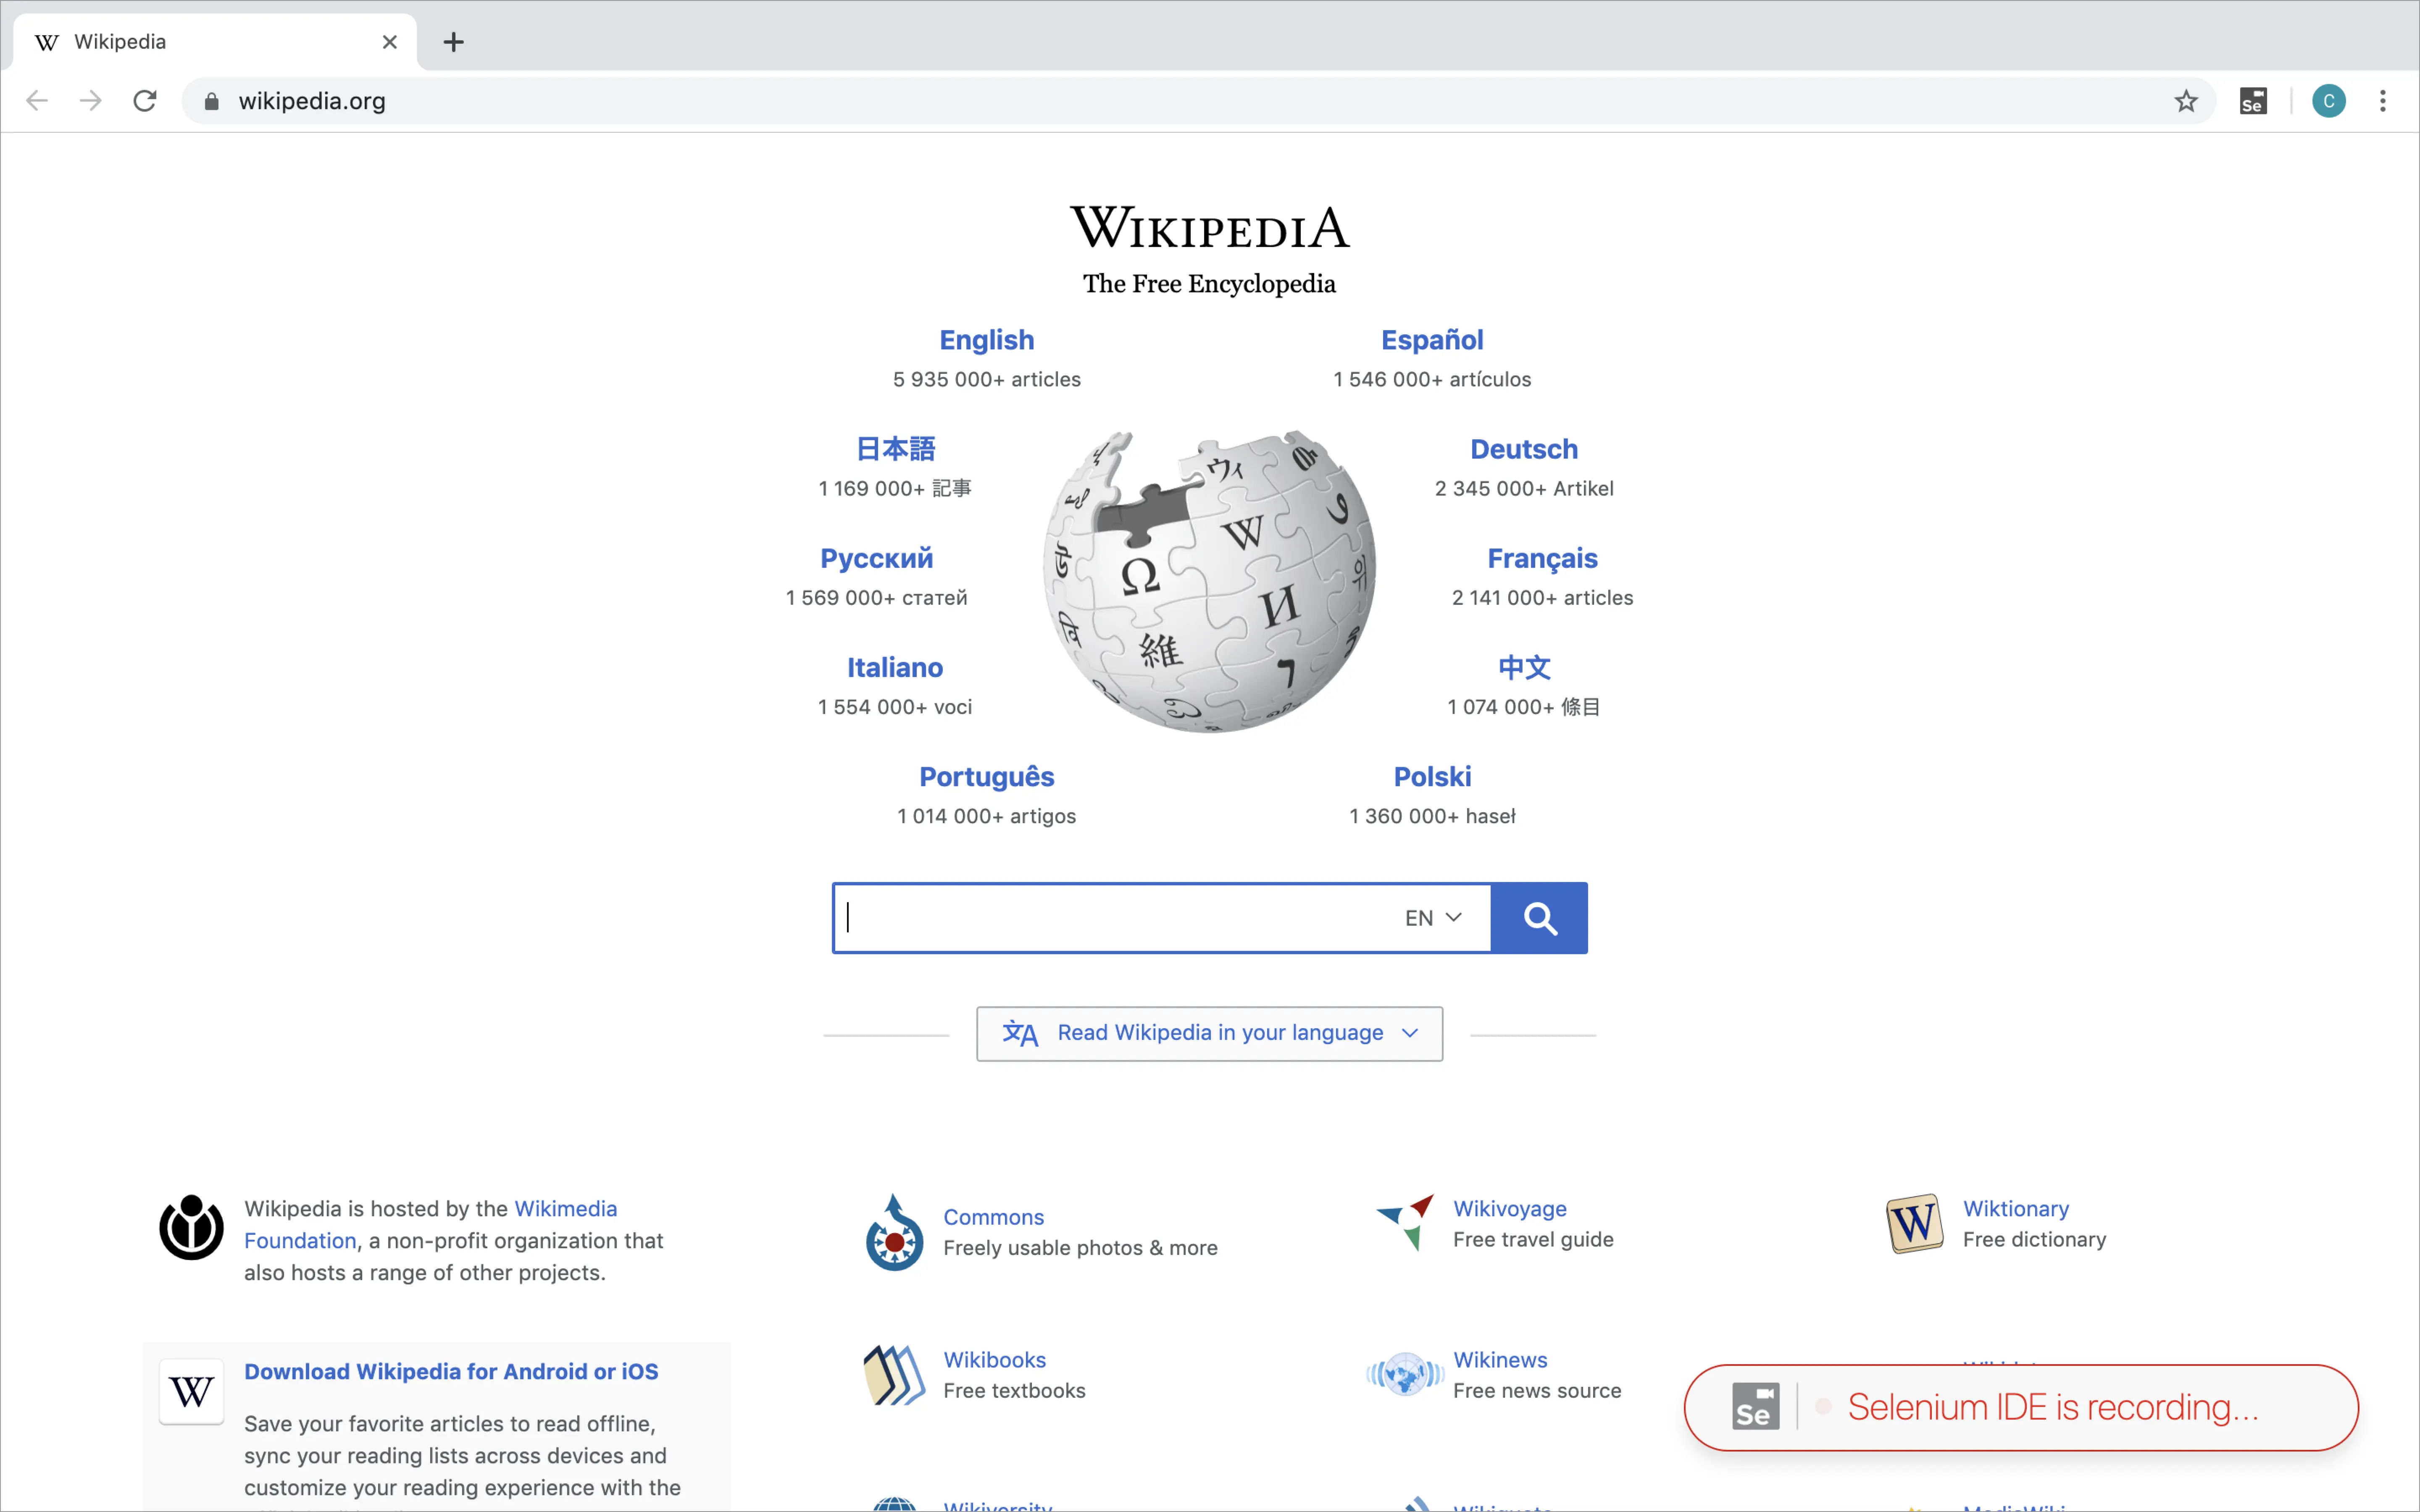 Wikipedia page opened with Selenium IDE for interaction